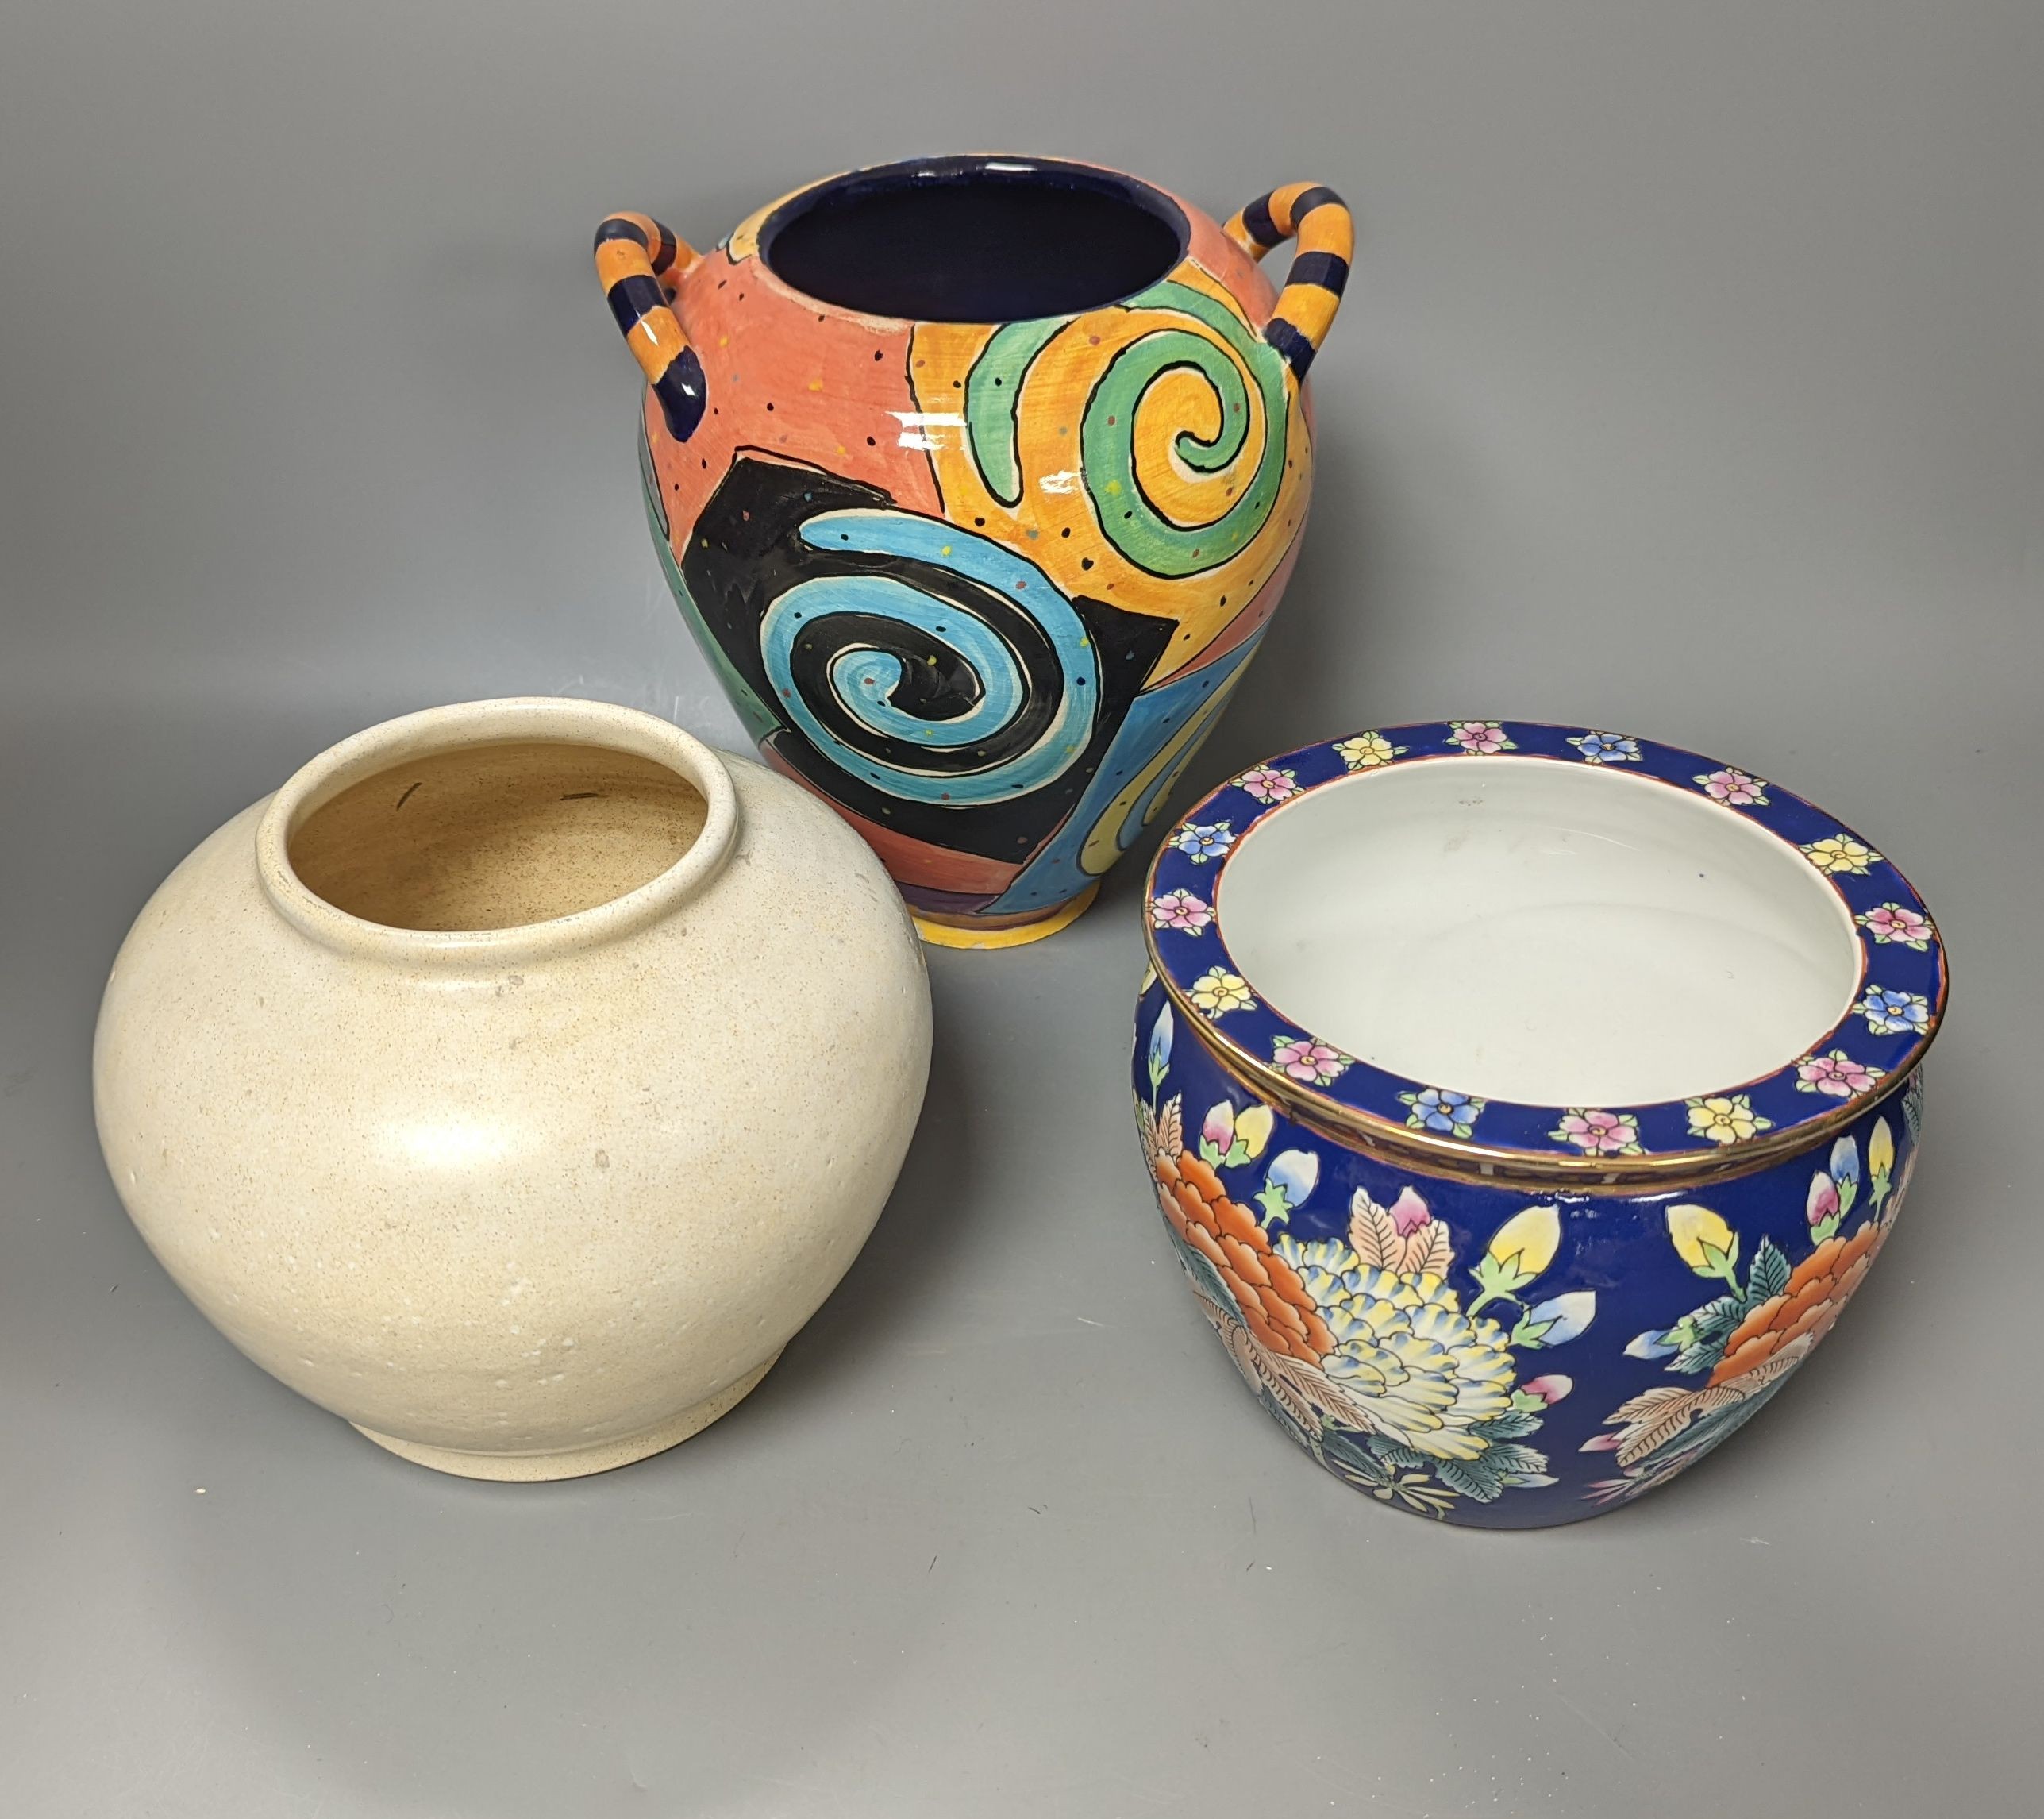 A cream glazed stoneware vase, initialled NKV, 15cm, a Jane Willingale Loudware vase, and a small Chinese Jardiniere